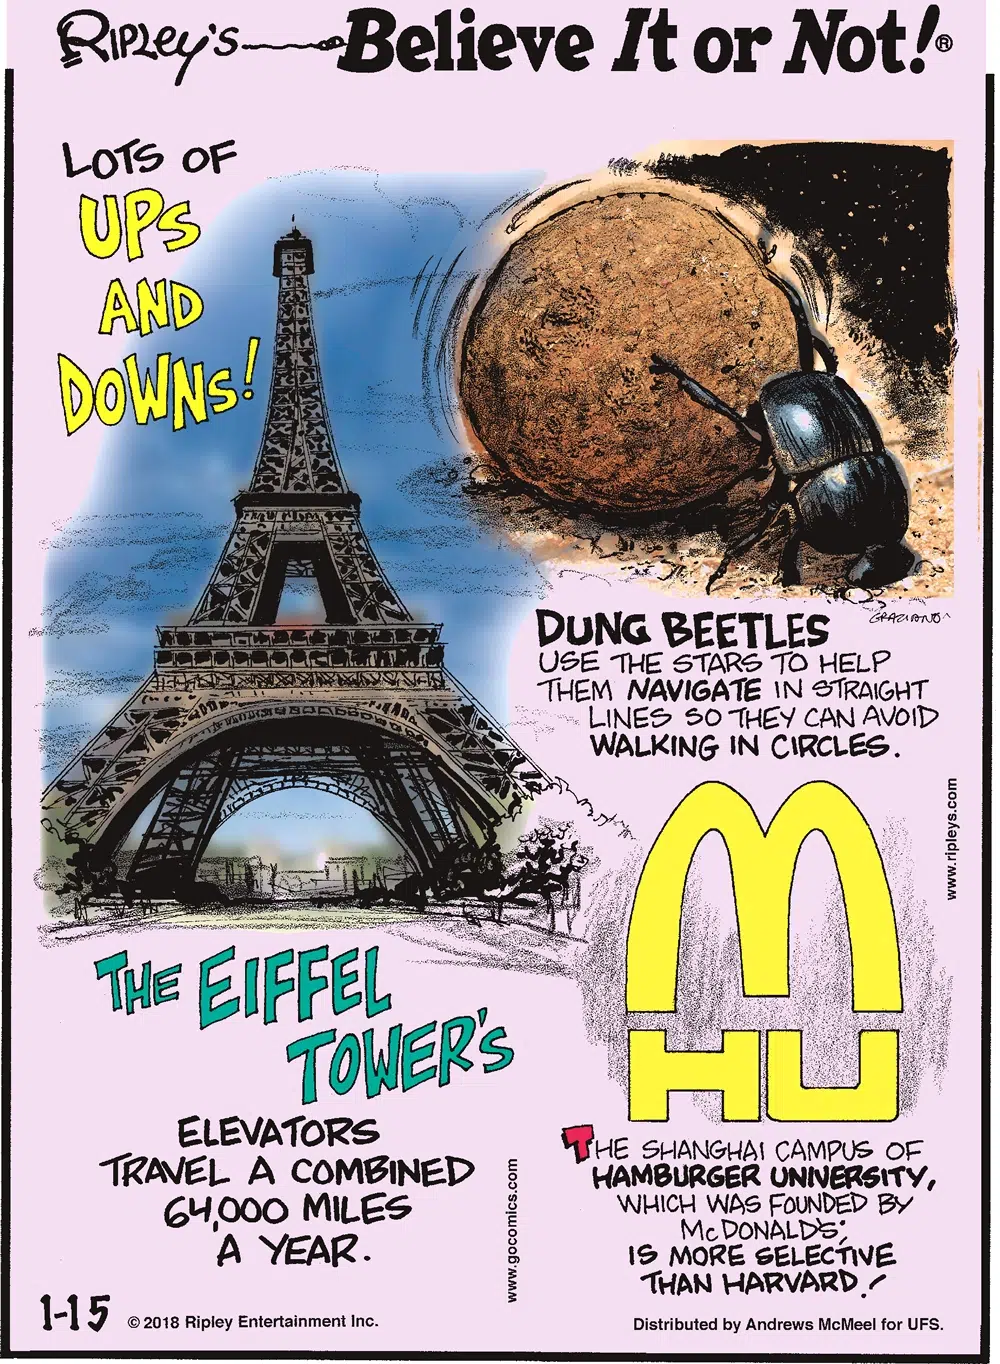 The Eiffel Tower's elevators travel a combined 64,000 miles a year.-------------------- Dung beetles use the stars to help them navigate in straight lines so they can avoid walking in circles.-------------------- The Shanghai campus of Hamburger University, which was founded by McDonald's, is more selective than Harvard!